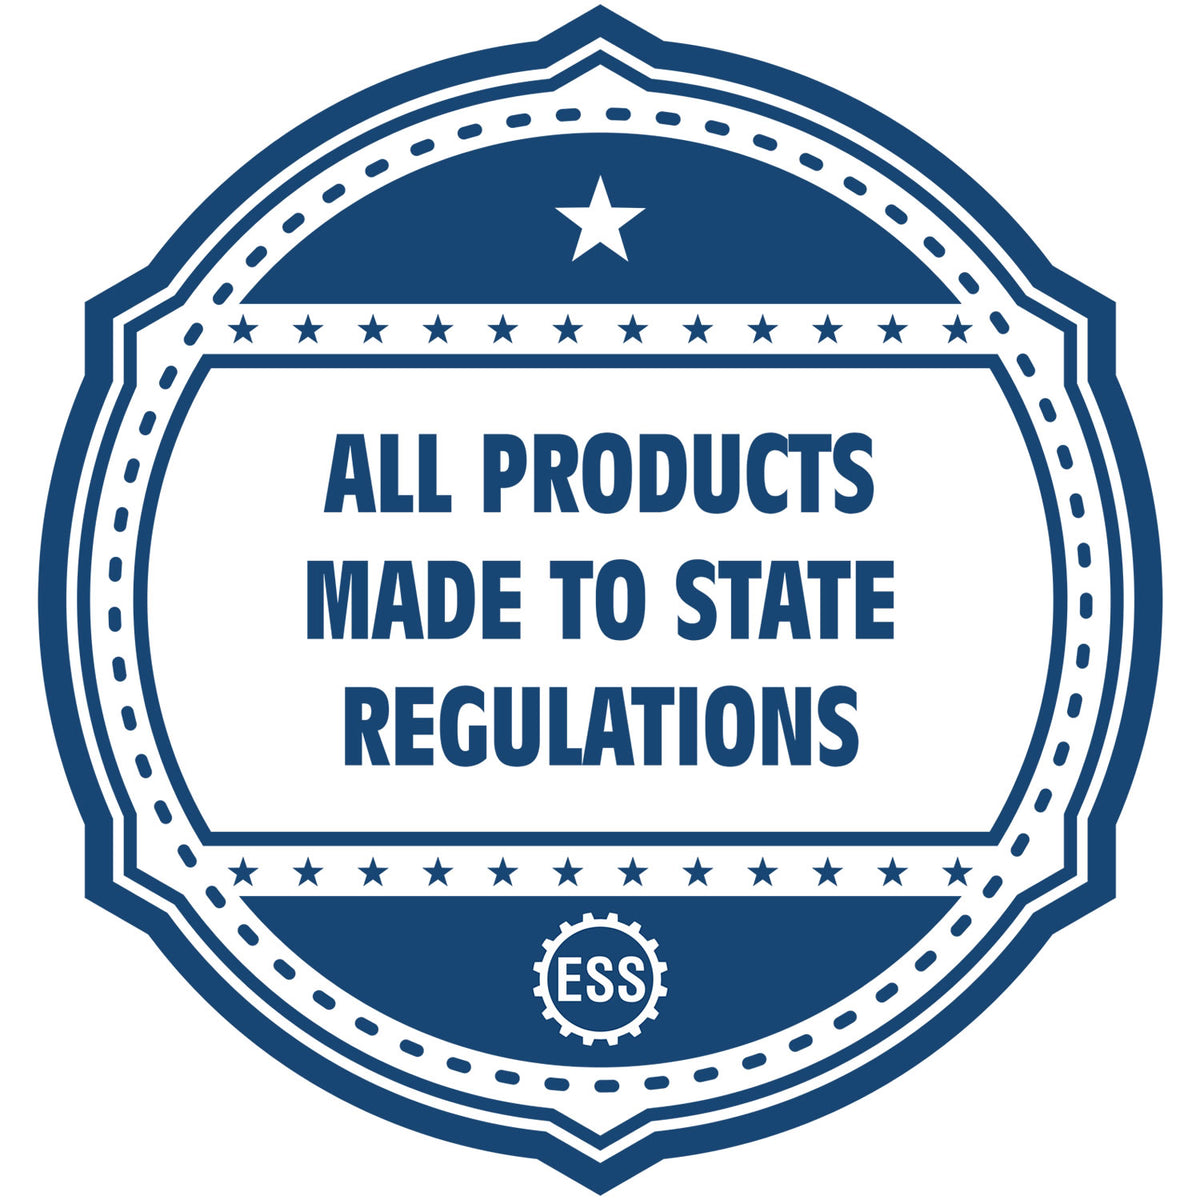 An icon or badge element for the Handheld Arkansas Land Surveyor Seal showing that this product is made in compliance with state regulations.